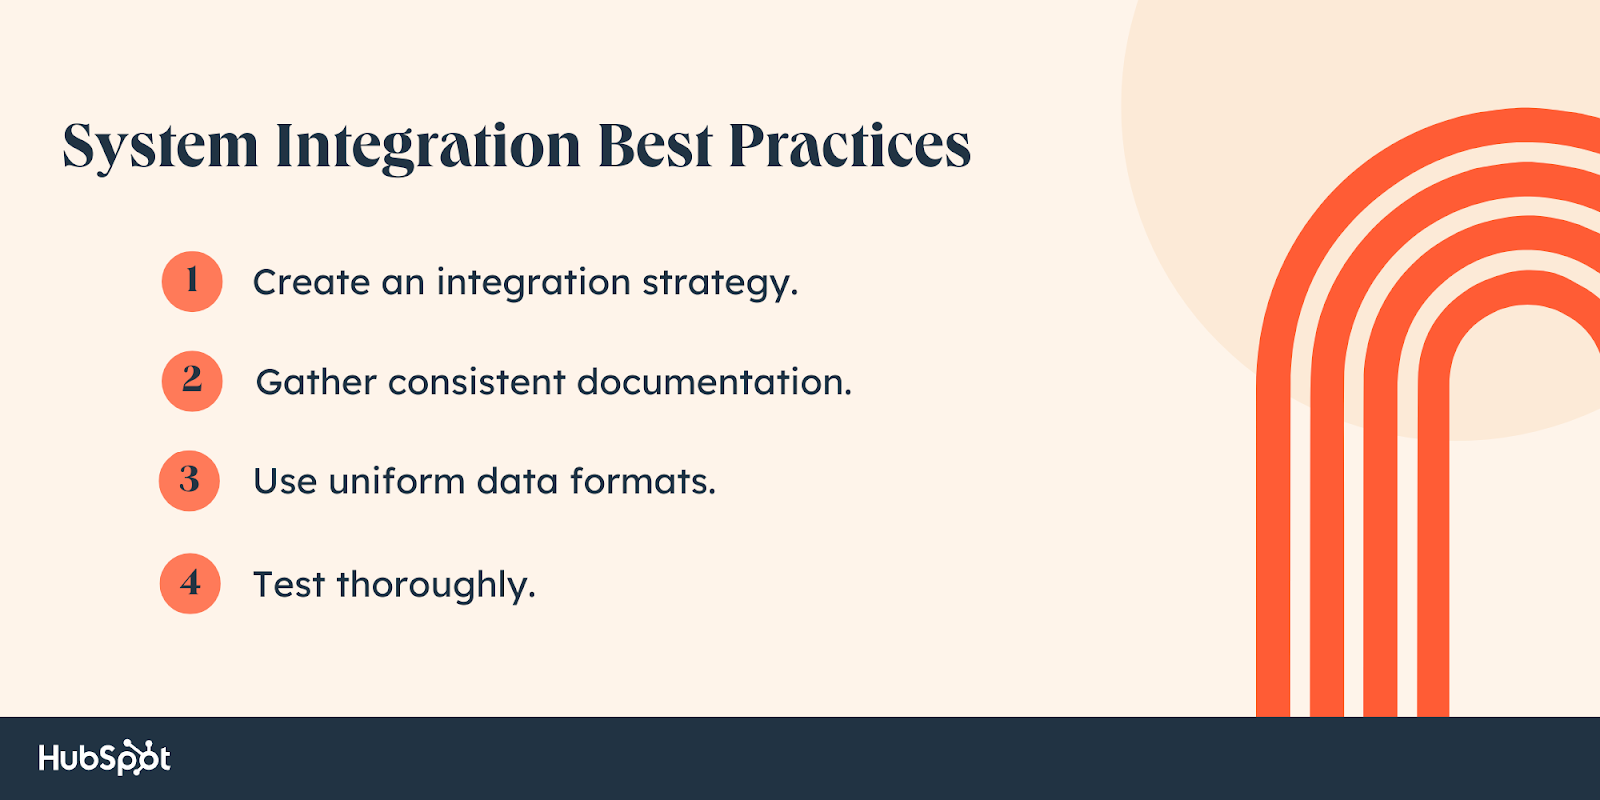 System Integration Best Practices. Create an integration strategy. Gather consistent documentation. Use uniform data formats. Test thoroughly.